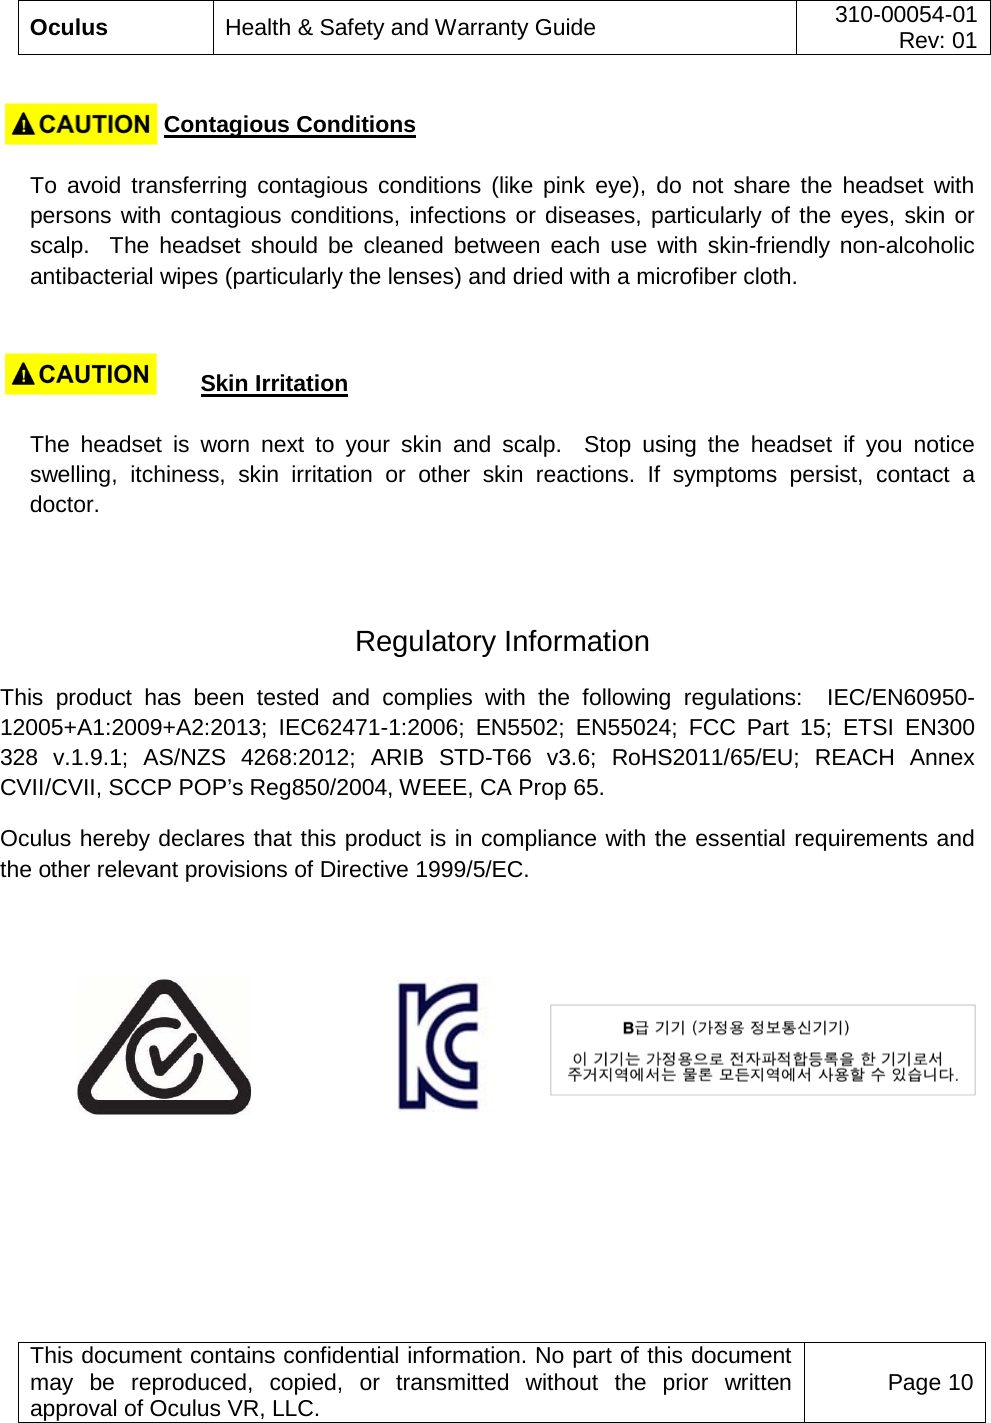  Oculus Health &amp; Safety and Warranty Guide 310-00054-01  Rev: 01   This document contains confidential information. No part of this document may be reproduced, copied, or transmitted without the prior written approval of Oculus VR, LLC. Page 10                        Contagious Conditions    To avoid transferring contagious conditions (like pink eye), do not share the headset with persons with contagious conditions, infections or diseases, particularly of the eyes, skin or scalp.  The headset should be cleaned between each use with skin-friendly non-alcoholic antibacterial wipes (particularly the lenses) and dried with a microfiber cloth.                        Skin Irritation    The headset is worn next to your skin and scalp.  Stop using the headset if you notice swelling, itchiness, skin  irritation or other skin reactions. If symptoms persist, contact a doctor.   Regulatory Information This product has been tested and complies with the following regulations:  IEC/EN60950-12005+A1:2009+A2:2013; IEC62471-1:2006; EN5502; EN55024; FCC Part 15; ETSI EN300 328 v.1.9.1; AS/NZS 4268:2012; ARIB STD-T66 v3.6; RoHS2011/65/EU; REACH Annex CVII/CVII, SCCP POP’s Reg850/2004, WEEE, CA Prop 65. Oculus hereby declares that this product is in compliance with the essential requirements and the other relevant provisions of Directive 1999/5/EC.     